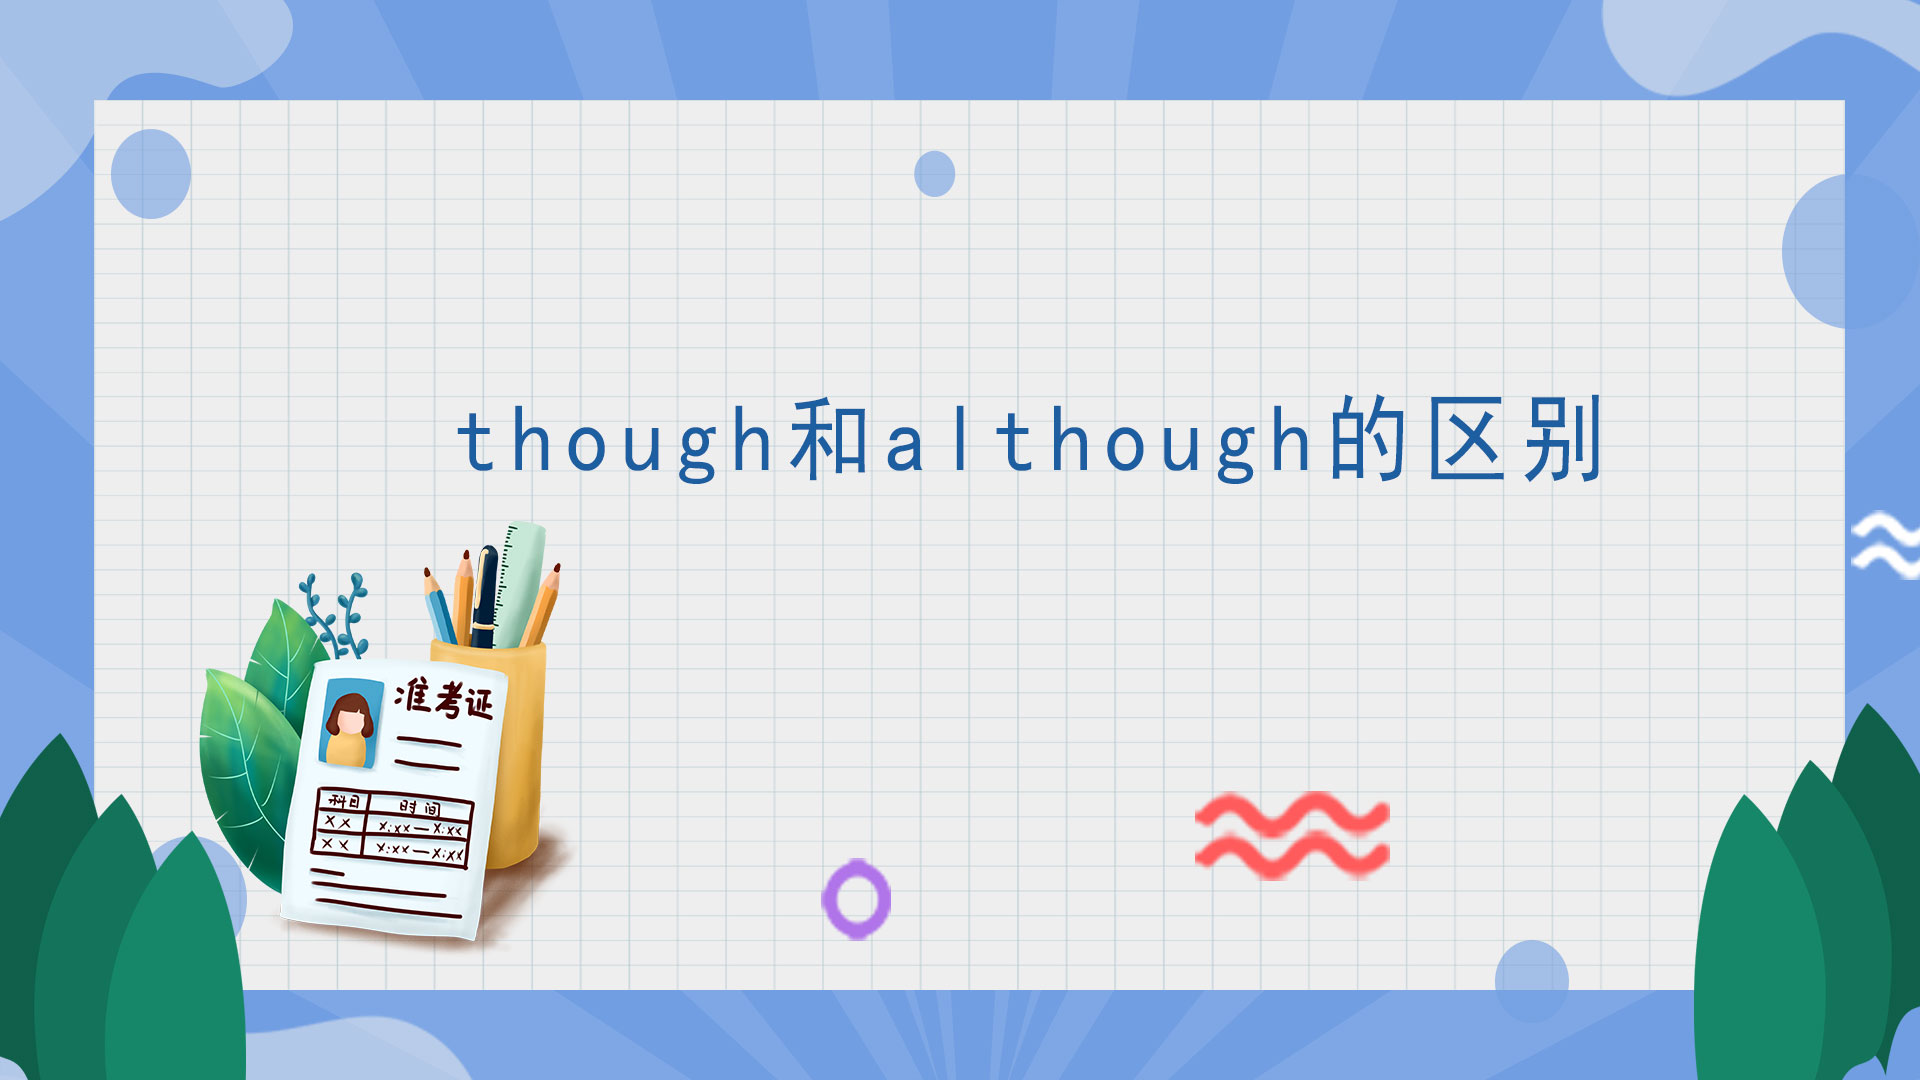 though和although的区别